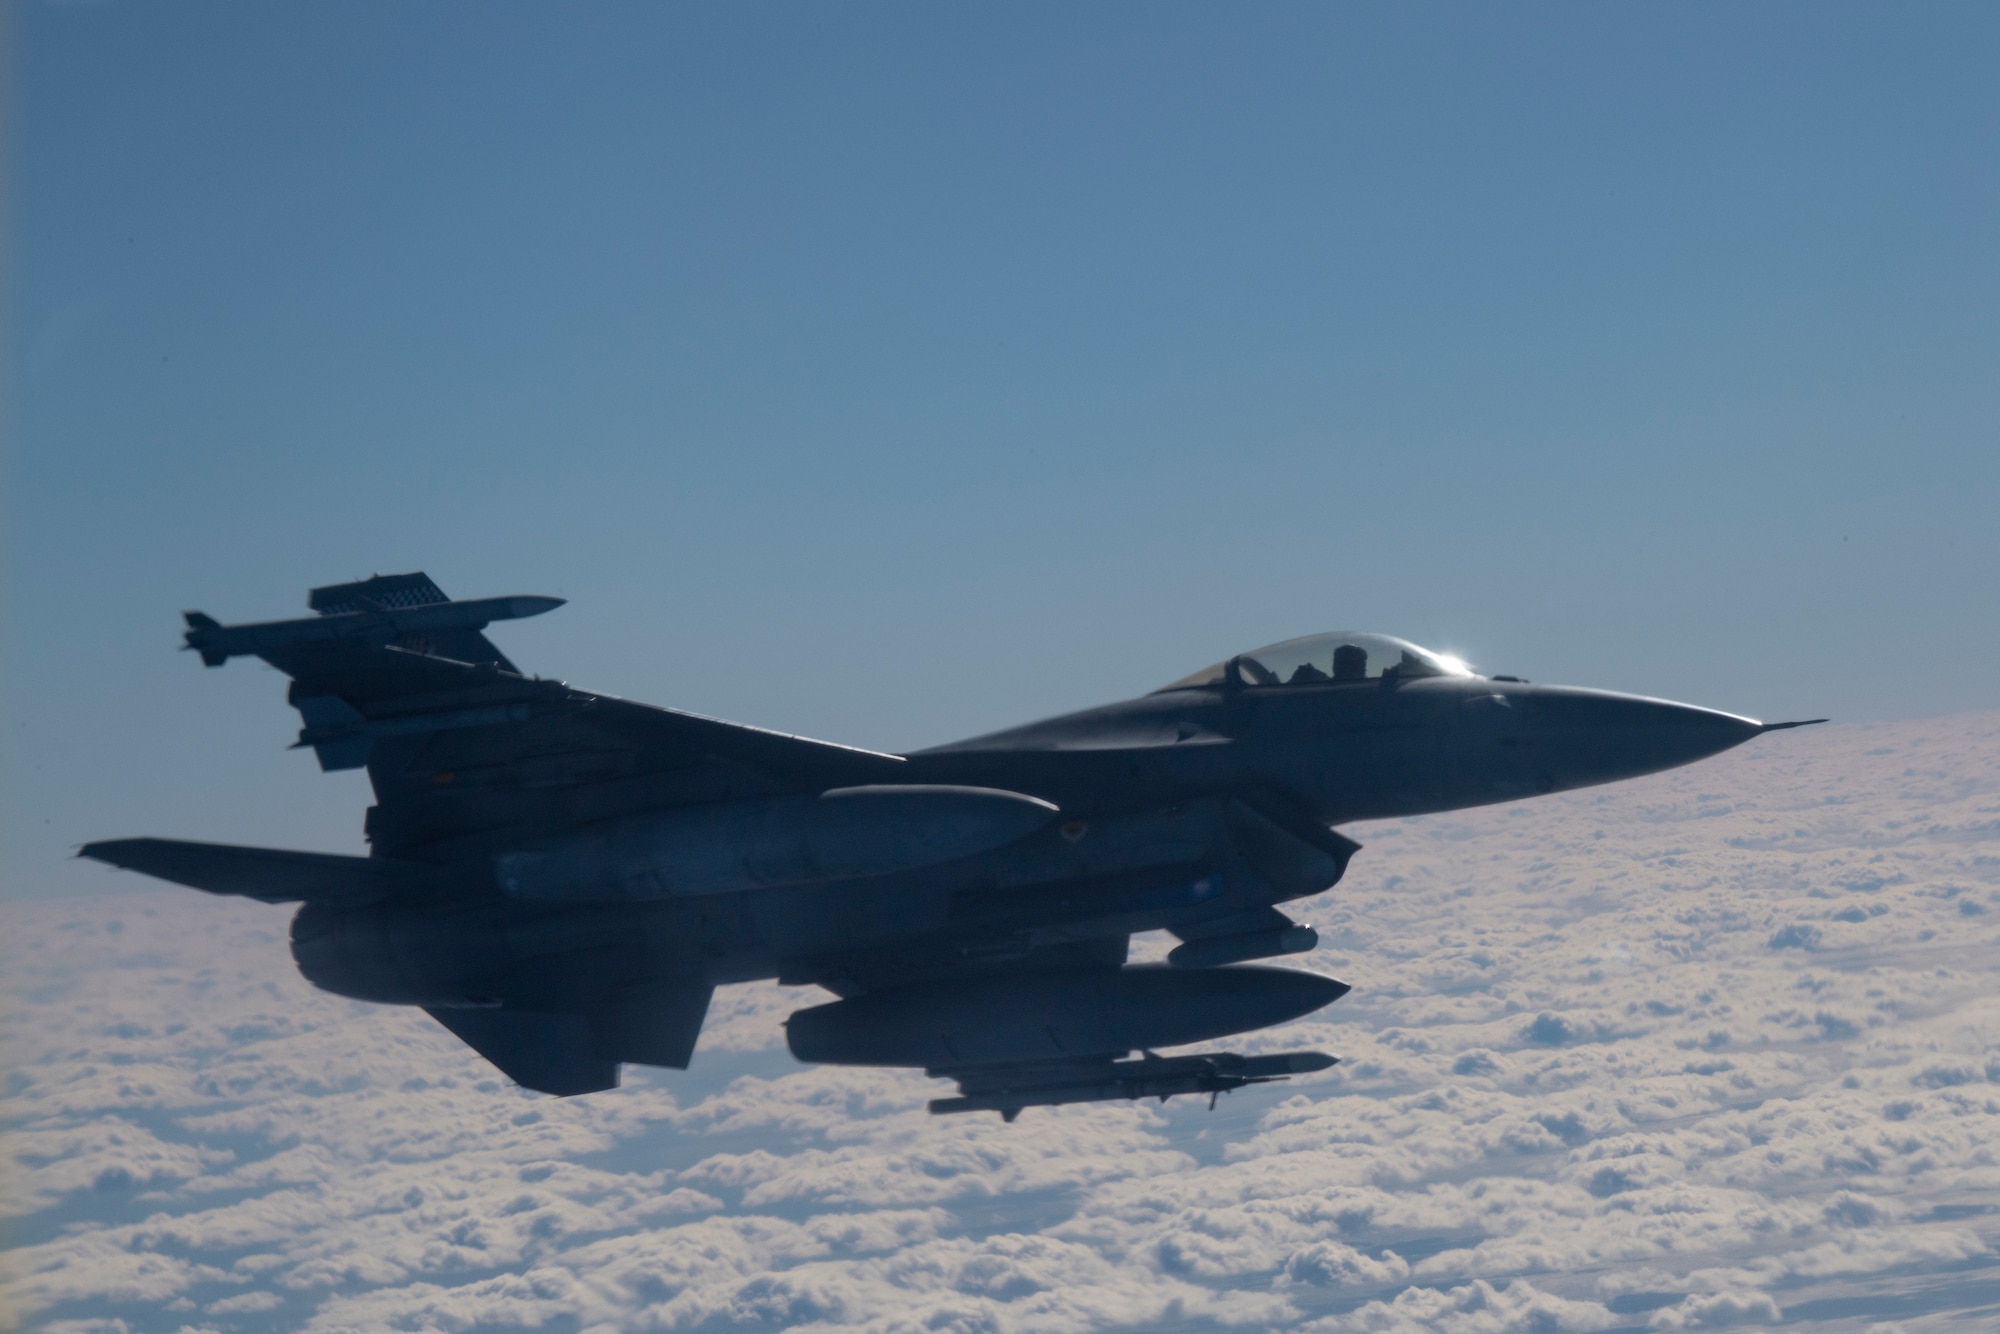 An F-16 Fighting Falcon aircraft, assigned to Shaw Air Force Base (AFB), South Carolina, flies near a KC-135 Stratotanker aircraft assigned to MacDill AFB, Florida, to provides defensive air support during a training scenario, Dec. 2, 2020.